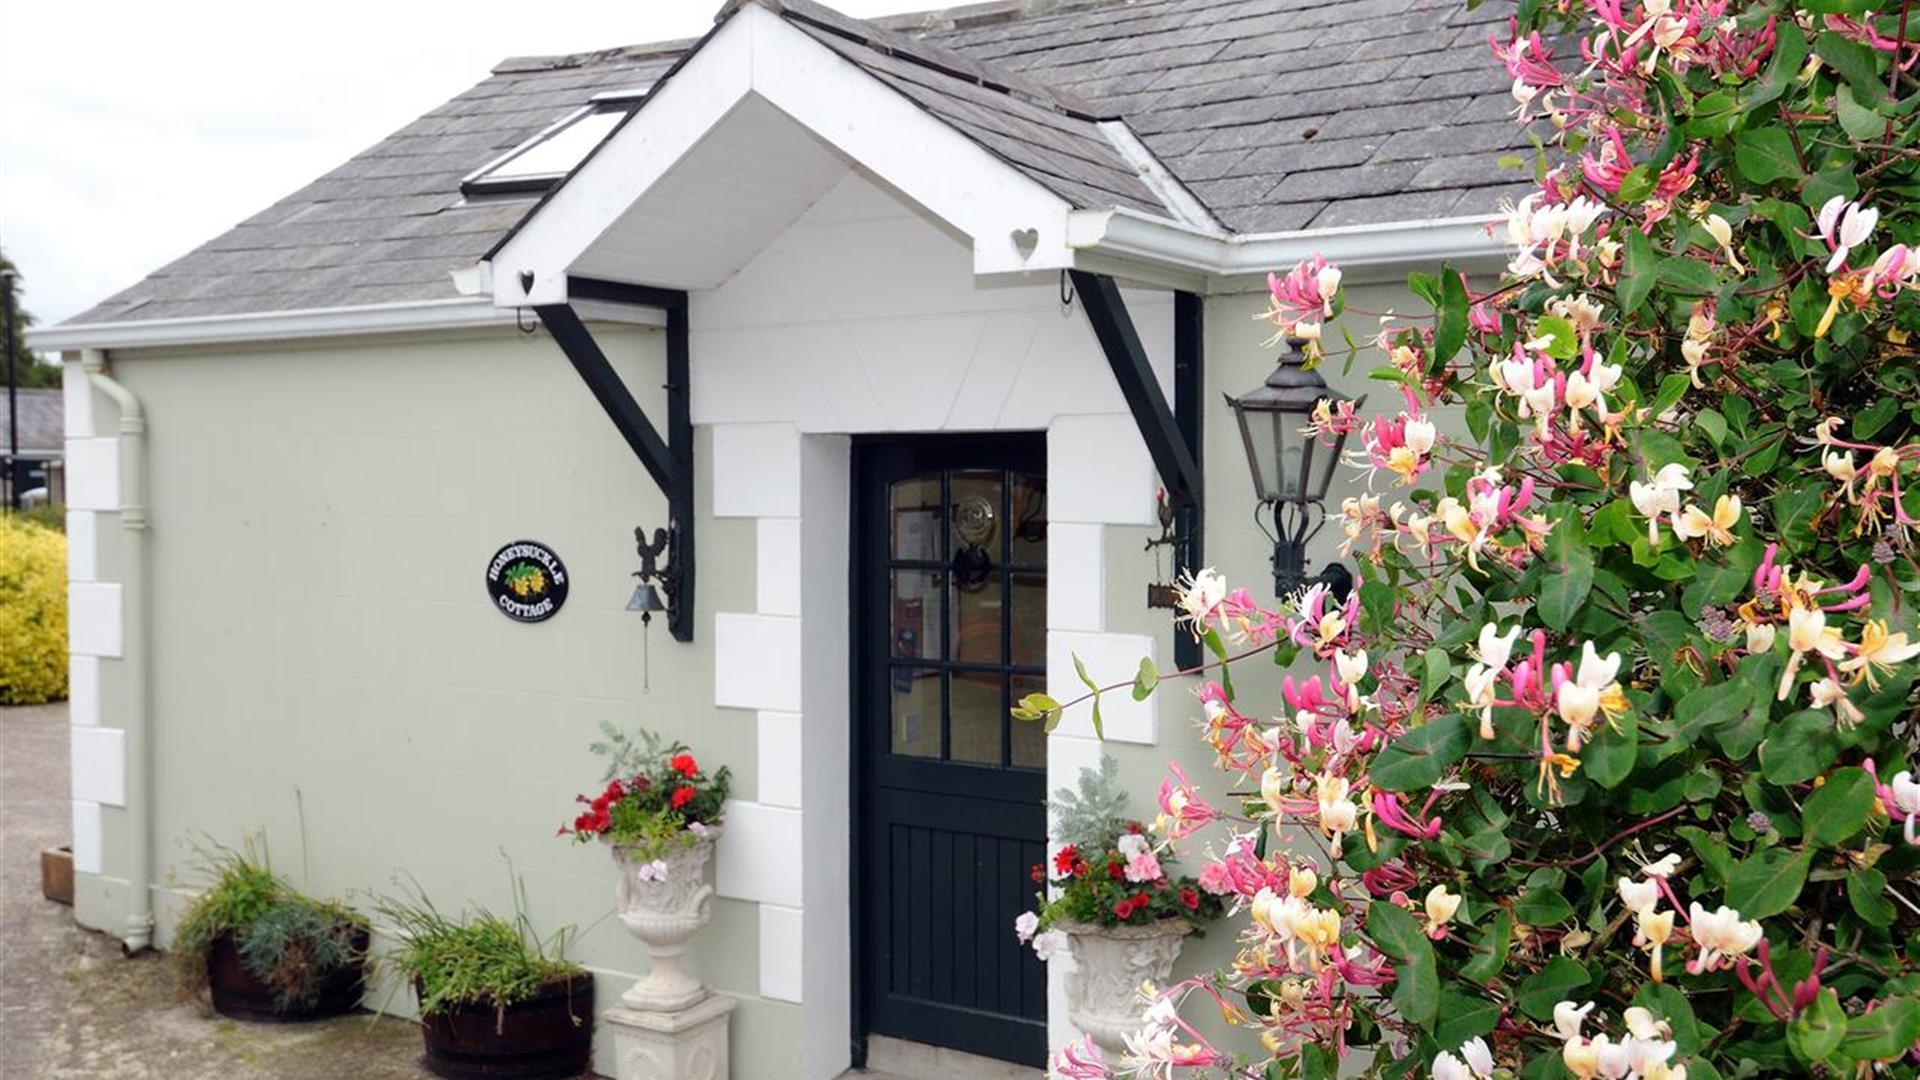 Images shows front door of cottage with hedge and flowers to the left of it.